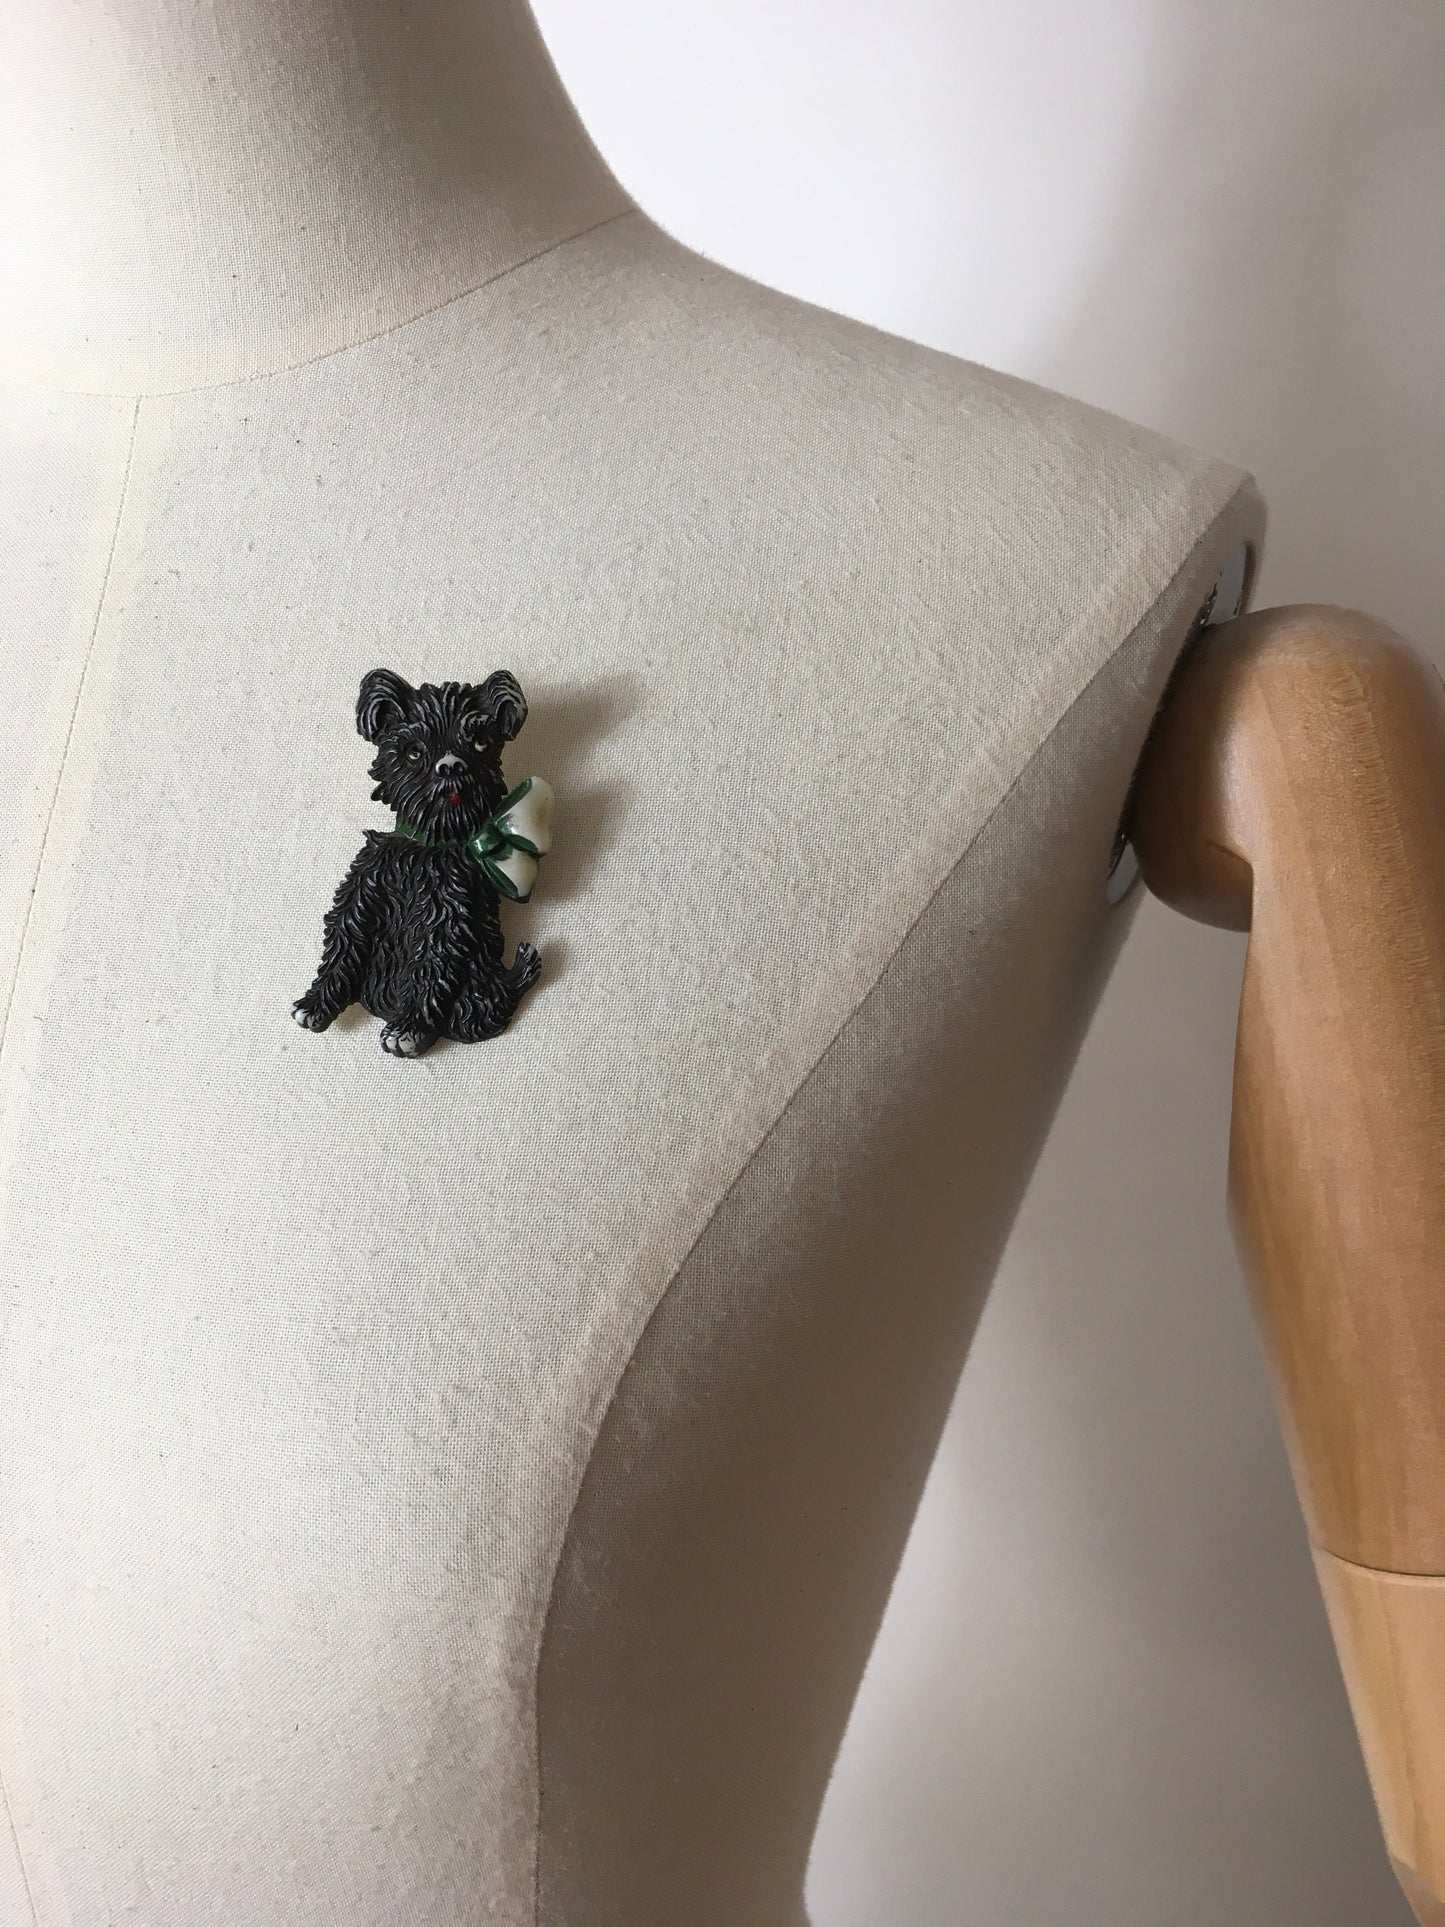 Original 1940’s Celluloid Dog Brooch - Dark Black with a Lovely Green Bow